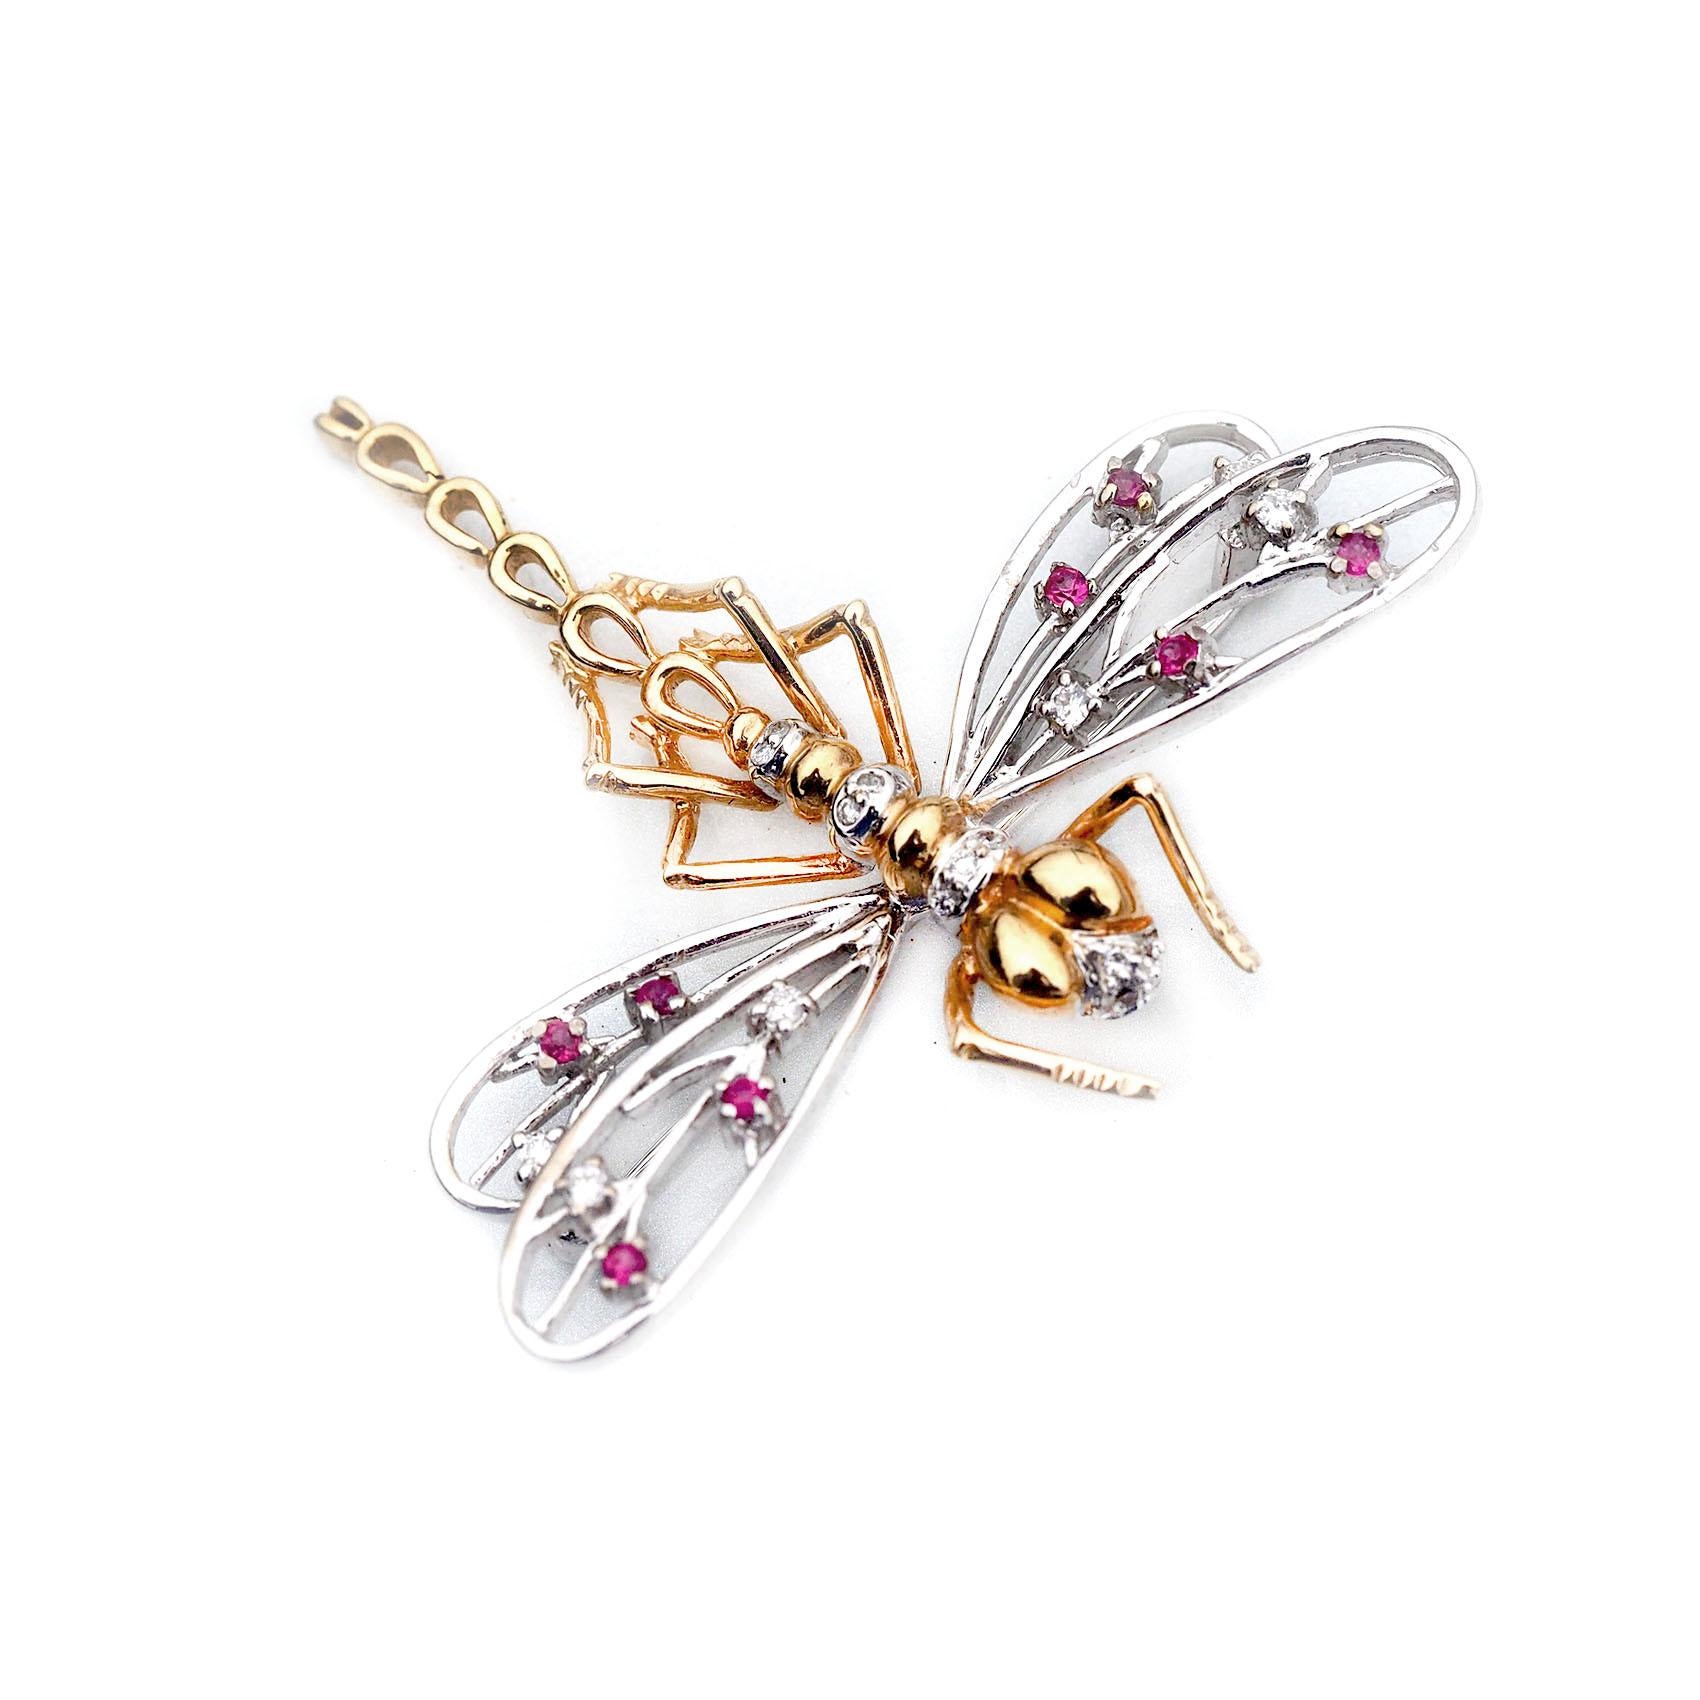 Please see this 14k Yellow and White Gold Dragonfly Ruby and Diamond Pin. I have shot images from various angles so you can see it completely (both front and back). This piece weighs 6.5 grams total. 